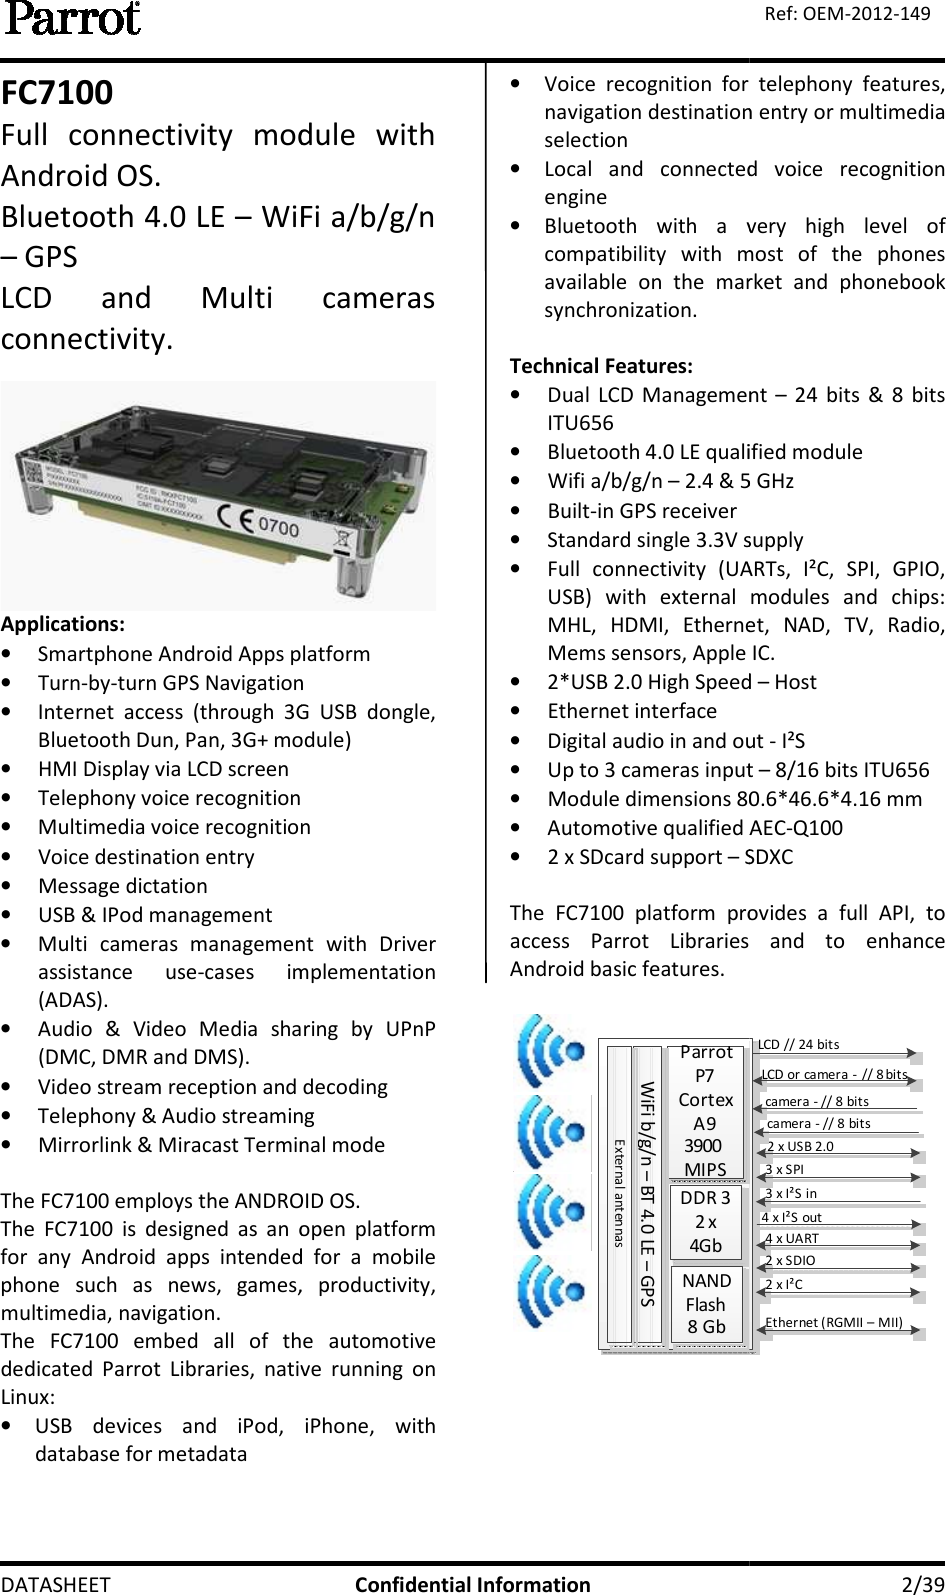  DATASHEET FC7100 Full  connectivity  module  with Android OS. Bluetooth 4.0 LE – WiFi – GPS  LCD  and  Multi  cameras connectivity.  Applications: • Smartphone Android Apps platform• Turn-by-turn GPS Navigation• Internet  access  (through  3G  USB  dongle, Bluetooth Dun, Pan, 3G+ module)• HMI Display via LCD screen • Telephony voice recognition• Multimedia voice recognition• Voice destination entry • Message dictation • USB &amp; IPod management • Multi  cameras  management  with  Driver assistance  use-cases  implementation (ADAS). • Audio  &amp;  Video  Media  sharing  by  UPnP (DMC, DMR and DMS). • Video stream reception and decoding• Telephony &amp; Audio streaming• Mirrorlink &amp; Miracast Terminal mode The FC7100 employs the ANDROID OSThe  FC7100  is  designed  as  an  open  platform for  any  Android  apps  intended  for  a  mobile phone  such  as  news,  games,  productivity, multimedia, navigation.  The  FC7100  embed  all  of  the  automotive dedicated Parrot  Libraries,  native  running  on Linux: • USB  devices  and  iPod,  iPhone,  with database for metadata Confidential Information Full  connectivity  module  with WiFi a/b/g/n LCD  and  Multi  cameras  Smartphone Android Apps platform turn GPS Navigation Internet  access  (through  3G  USB  dongle, Bluetooth Dun, Pan, 3G+ module)   Multimedia voice recognition Multi  cameras  management  with  Driver cases  implementation Audio  &amp;  Video  Media  sharing  by  UPnP Video stream reception and decoding Telephony &amp; Audio streaming cast Terminal mode The FC7100 employs the ANDROID OS. The  FC7100  is  designed  as  an  open  platform for  any  Android  apps  intended  for  a  mobile phone  such  as  news,  games,  productivity, The  FC7100  embed  all  of  the  automotive Parrot  Libraries,  native  running  on USB  devices  and  iPod,  iPhone,  with • Voice  recognition  for  telephony  features, navigation destination entry or multimedia selection • Local  and  connected  voice  recognition engine • Bluetooth  with a  very  high  level  of compatibility  with  most  of  the  phones available  on  the  market  and  phonebook synchronization.  Technical Features: • Dual  LCD Management ITU656  • Bluetooth 4.0 LE qualified module• Wifi a/b/g/n – 2.4 &amp; 5 GHz• Built-in GPS receiver • Standard single 3.3V supply• Full  connectivity  (UARTs,  I²C,  SPI,  GPIO, USB)  with  external  modules  and  chips: MHL,  HDMI,  Ethernet,  NAD,  TV,  Radio, Mems sensors, Apple IC.  • 2*USB 2.0 High Speed • Ethernet interface  • Digital audio in and out • Up to 3 cameras input • Module dimensions 80.6*46.6*4.1• Automotive qualified AEC• 2 x SDcard support – SDXC The  FC7100  platform  provides  a  full  API,  to access  Parrot  Libraries  and Android basic features.  Parrot P7Cortex A93900 MIPSDDR 32 x 4GbNAND Flash8 GbWiFi b/g/n – BT 4.0 LE – GPSExternal anten nas    2/39 Ref: OEM-2012-149 Voice  recognition  for  telephony  features, navigation destination entry or multimedia Local  and  connected  voice  recognition a  very  high  level  of compatibility  with  most  of  the  phones available  on  the  market  and  phonebook Dual  LCD Management – 24  bits  &amp;  8  bits Bluetooth 4.0 LE qualified module 2.4 &amp; 5 GHz  Standard single 3.3V supply Full  connectivity  (UARTs,  I²C,  SPI,  GPIO, USB)  with  external  modules  and  chips: MHL,  HDMI,  Ethernet,  NAD,  TV,  Radio, Mems sensors, Apple IC.   2*USB 2.0 High Speed – Host  Digital audio in and out - I²S Up to 3 cameras input – 8/16 bits ITU656 80.6*46.6*4.16 mm  Automotive qualified AEC-Q100 SDXC 100  platform  provides  a  full  API,  to access  Parrot  Libraries  and to  enhance LCD // 24 bitsLCD or camera - // 8 bits2 x USB 2.03 x SPI3 x I²S in4 x I²S out4 x UART2 x SDIO2 x I²CEthernet (RGMII – MII)camera - // 8 bitscamera - // 8 bits  